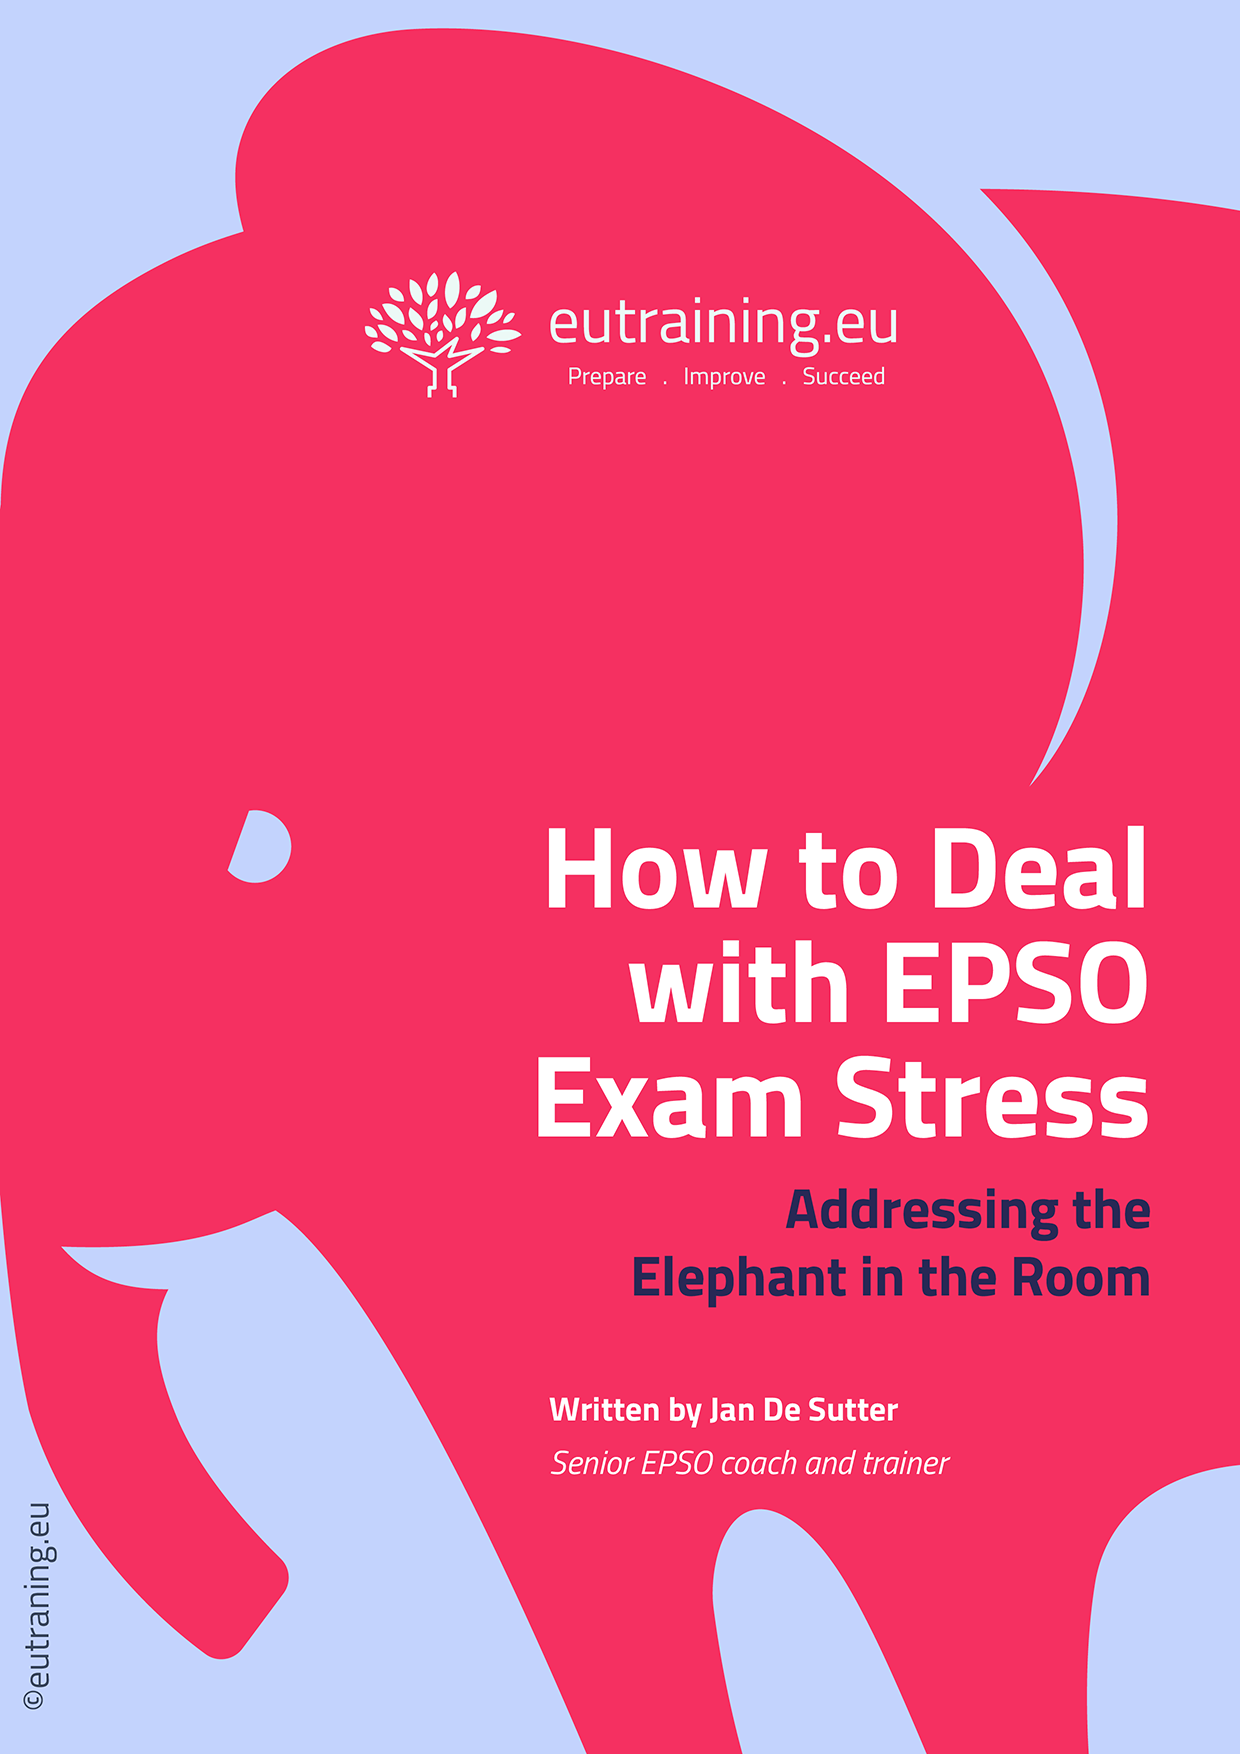 Addressing the Elephant in the Room: How to Manage EPSO Exam Stress